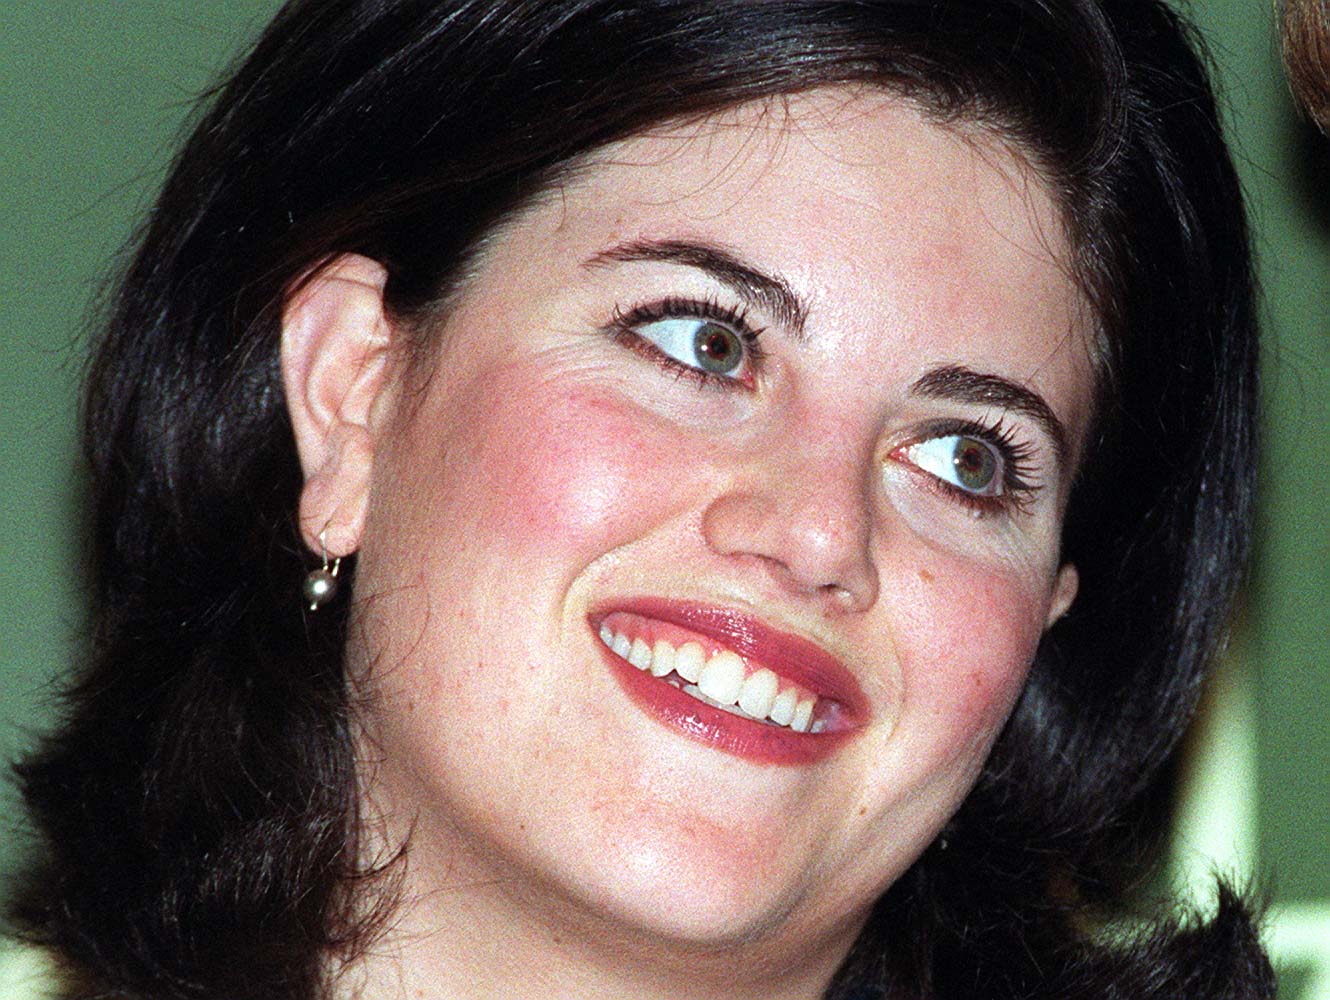 Monica Lewinsky at the Harrods department store on March 8, 1999 in Knightsbridge, London | Source: Getty Images